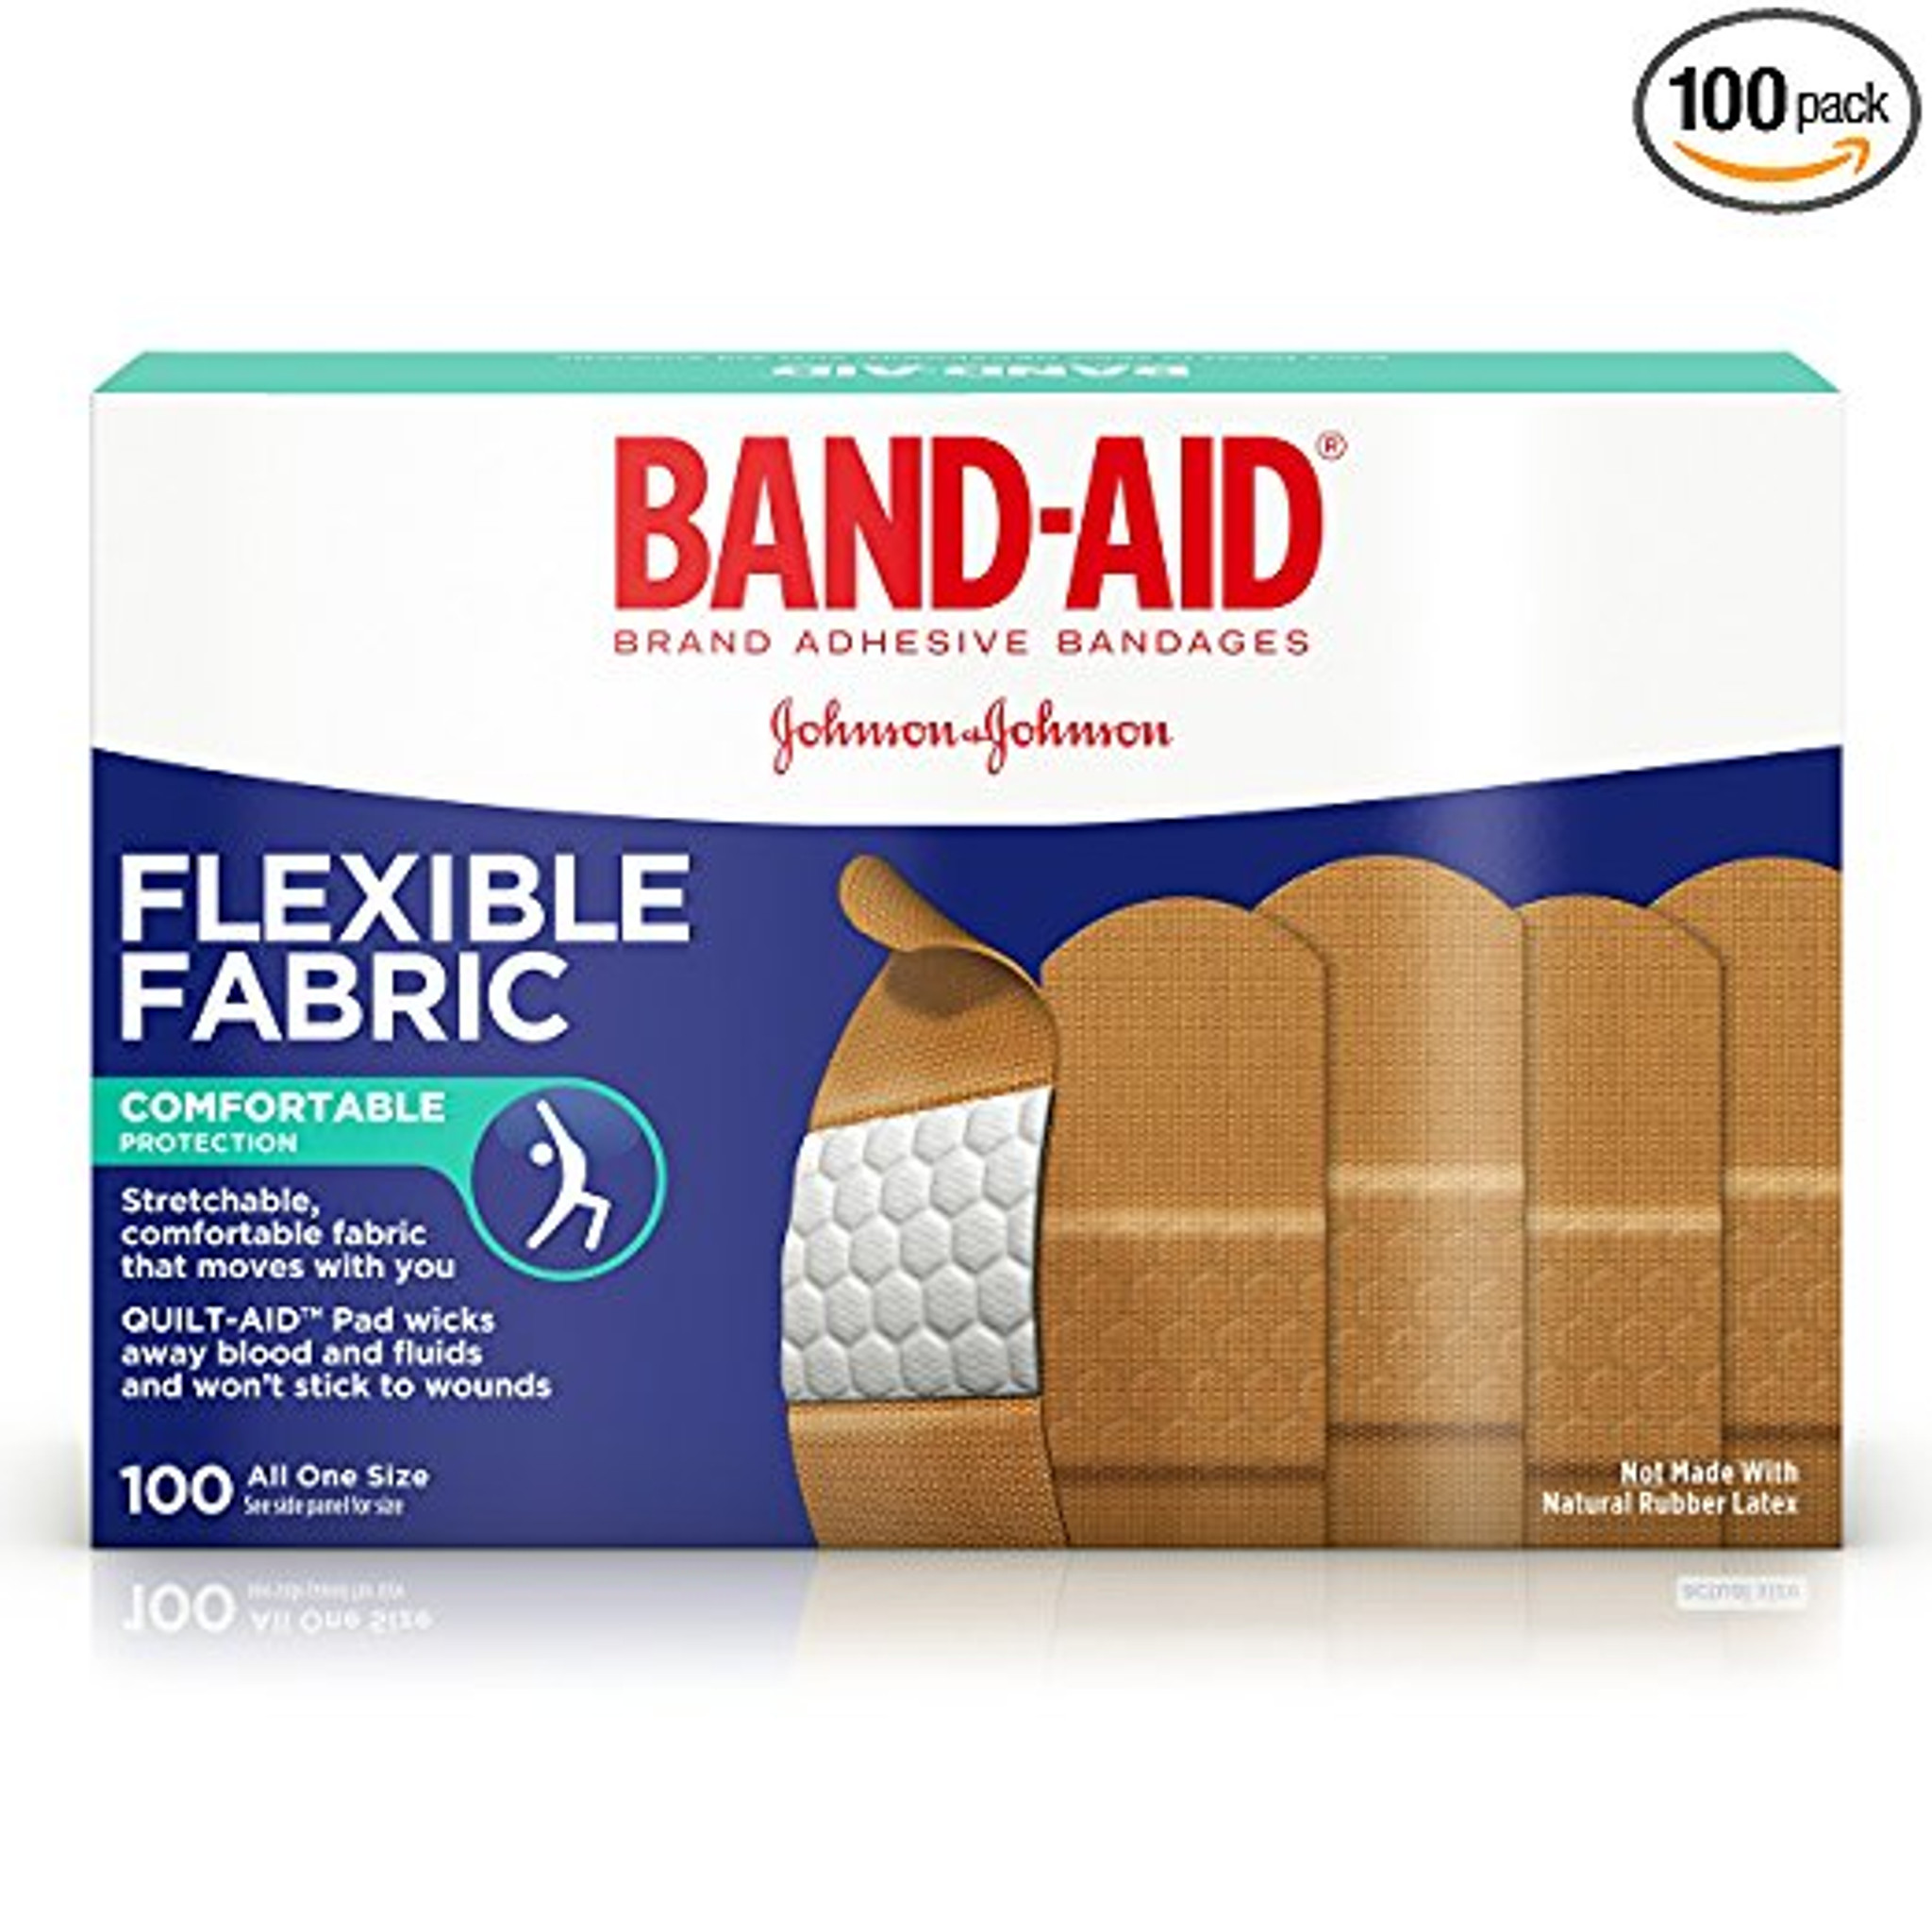 Flexible Fabric Bandages, assorted, 80 count